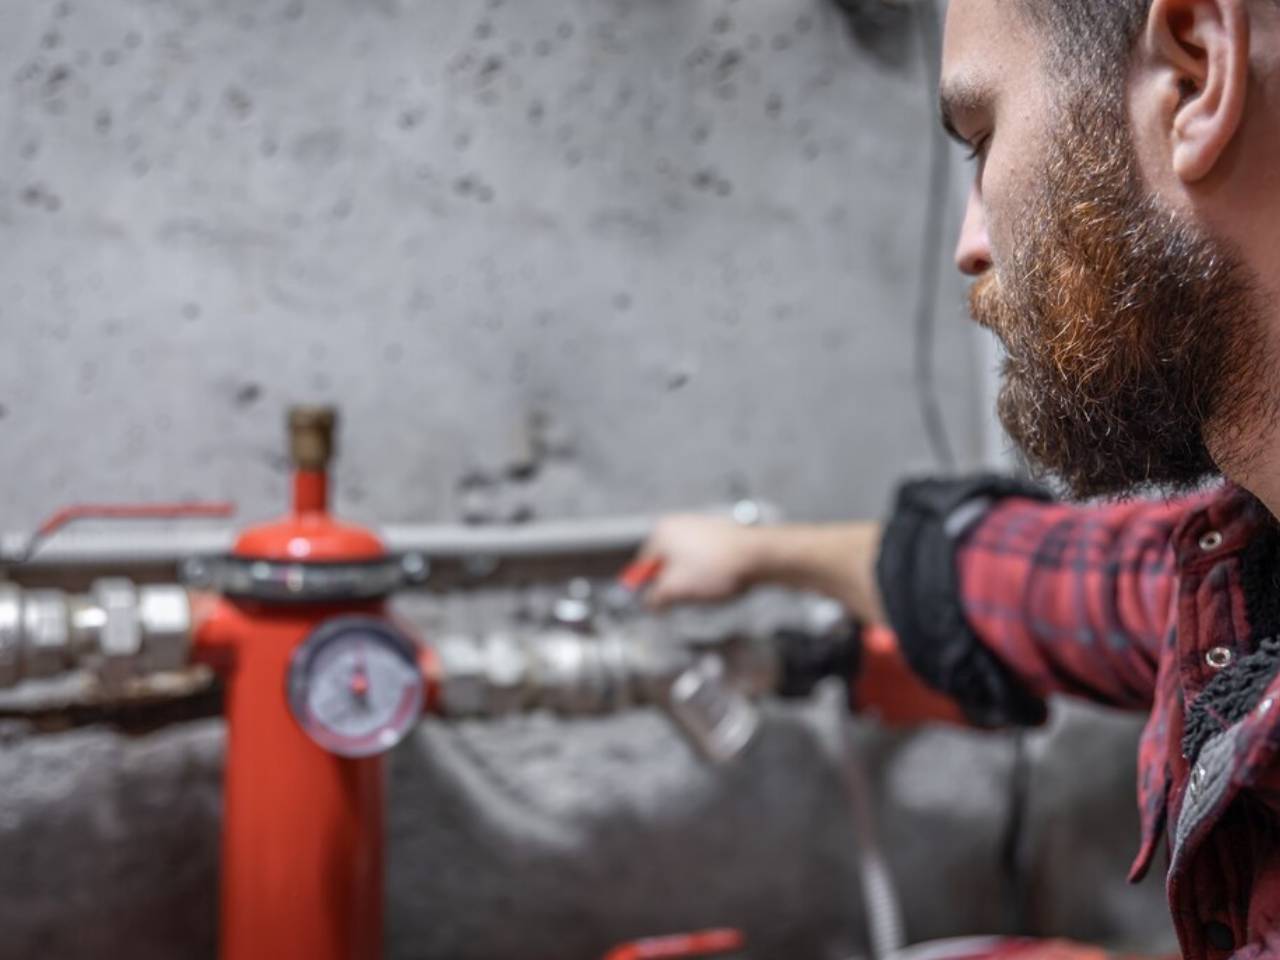 man looks at the faucet, pipes, valve, pressure meter.